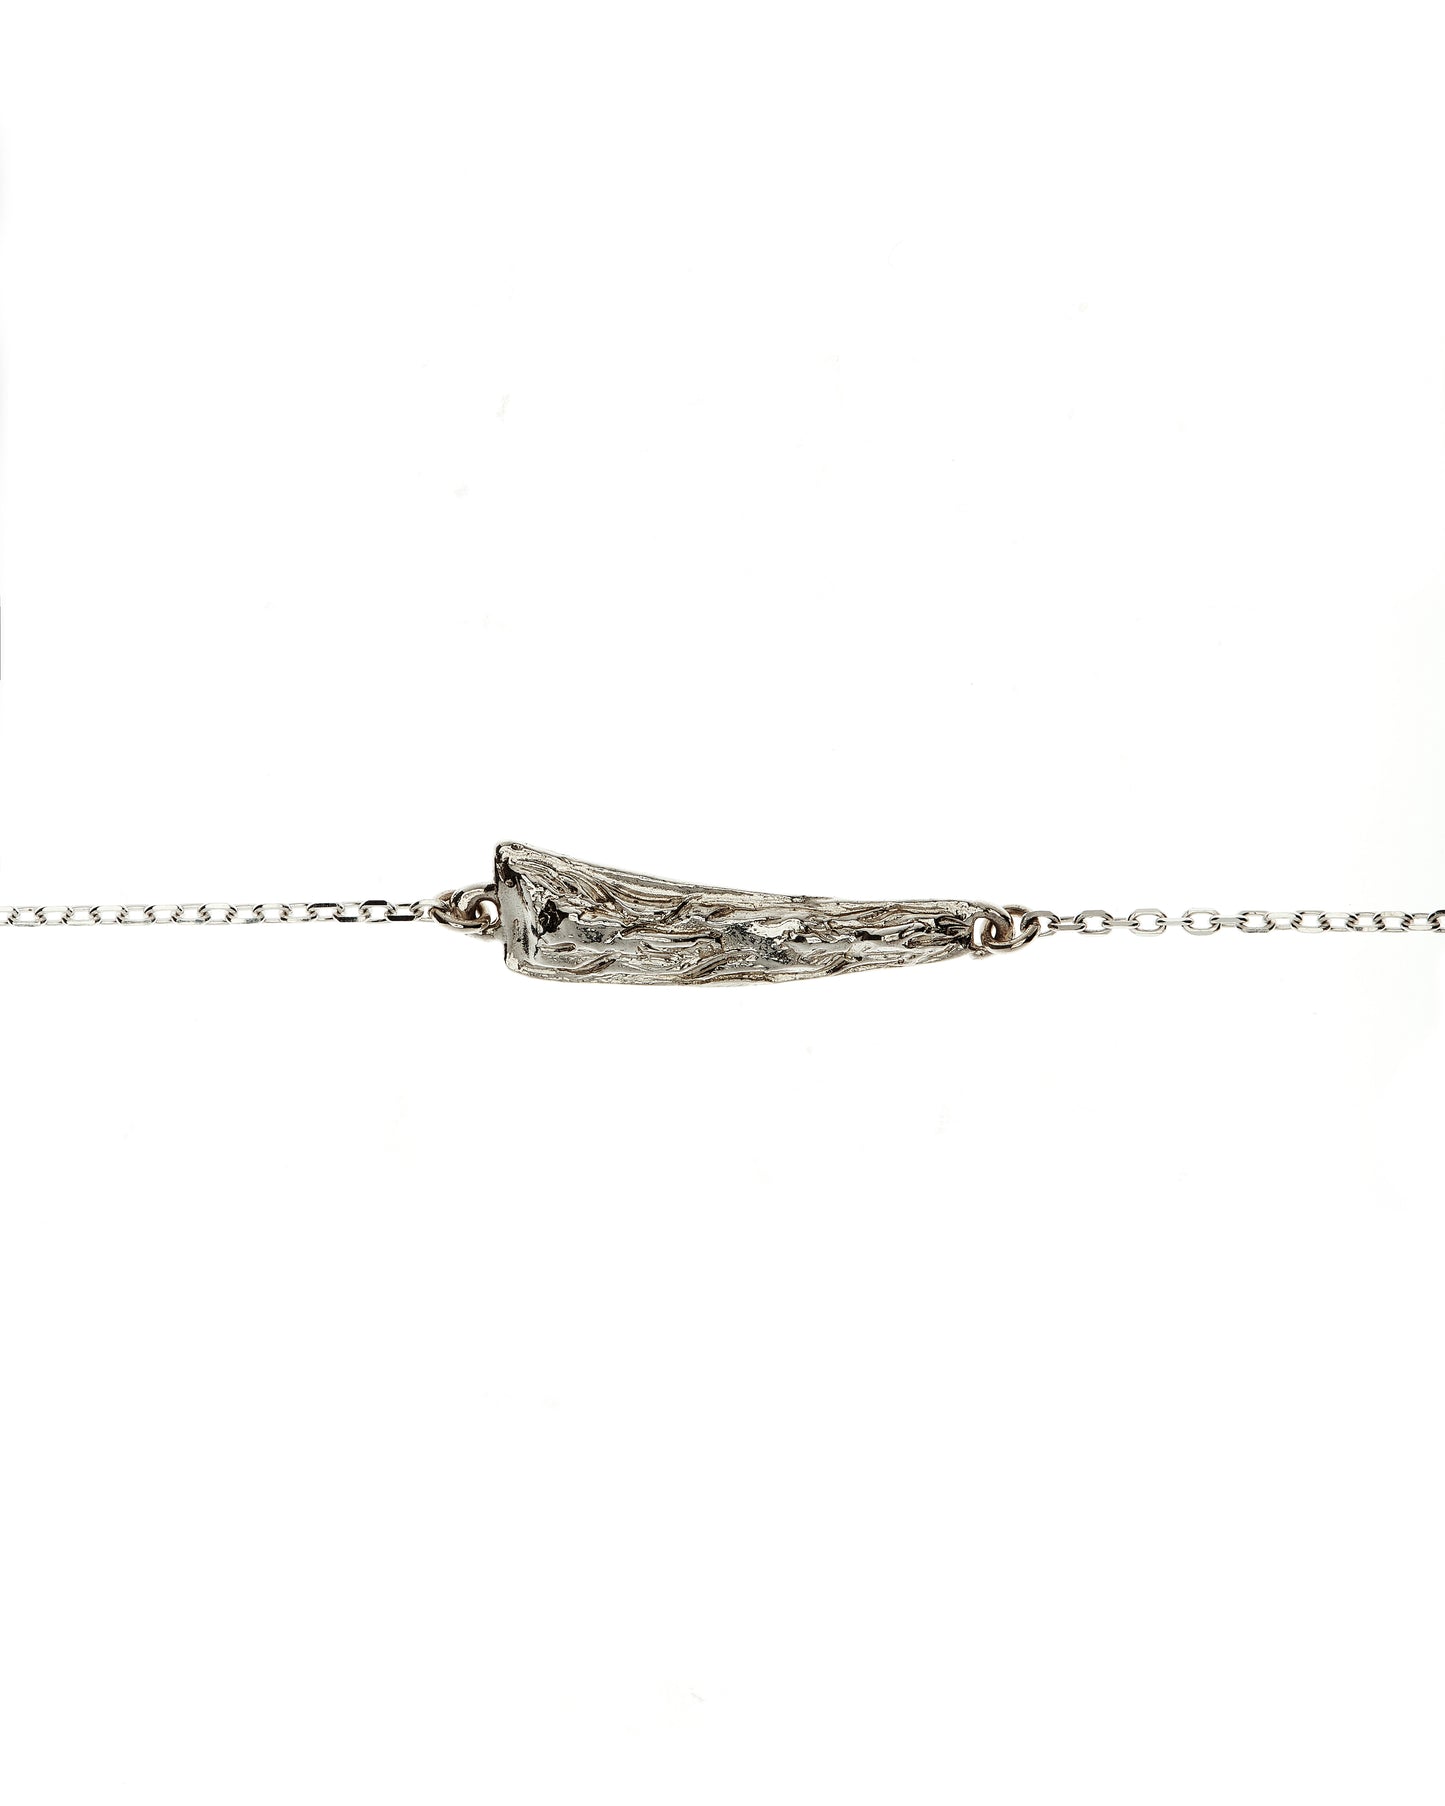 Sterling silver necklace, handmade along the wild atlantic way